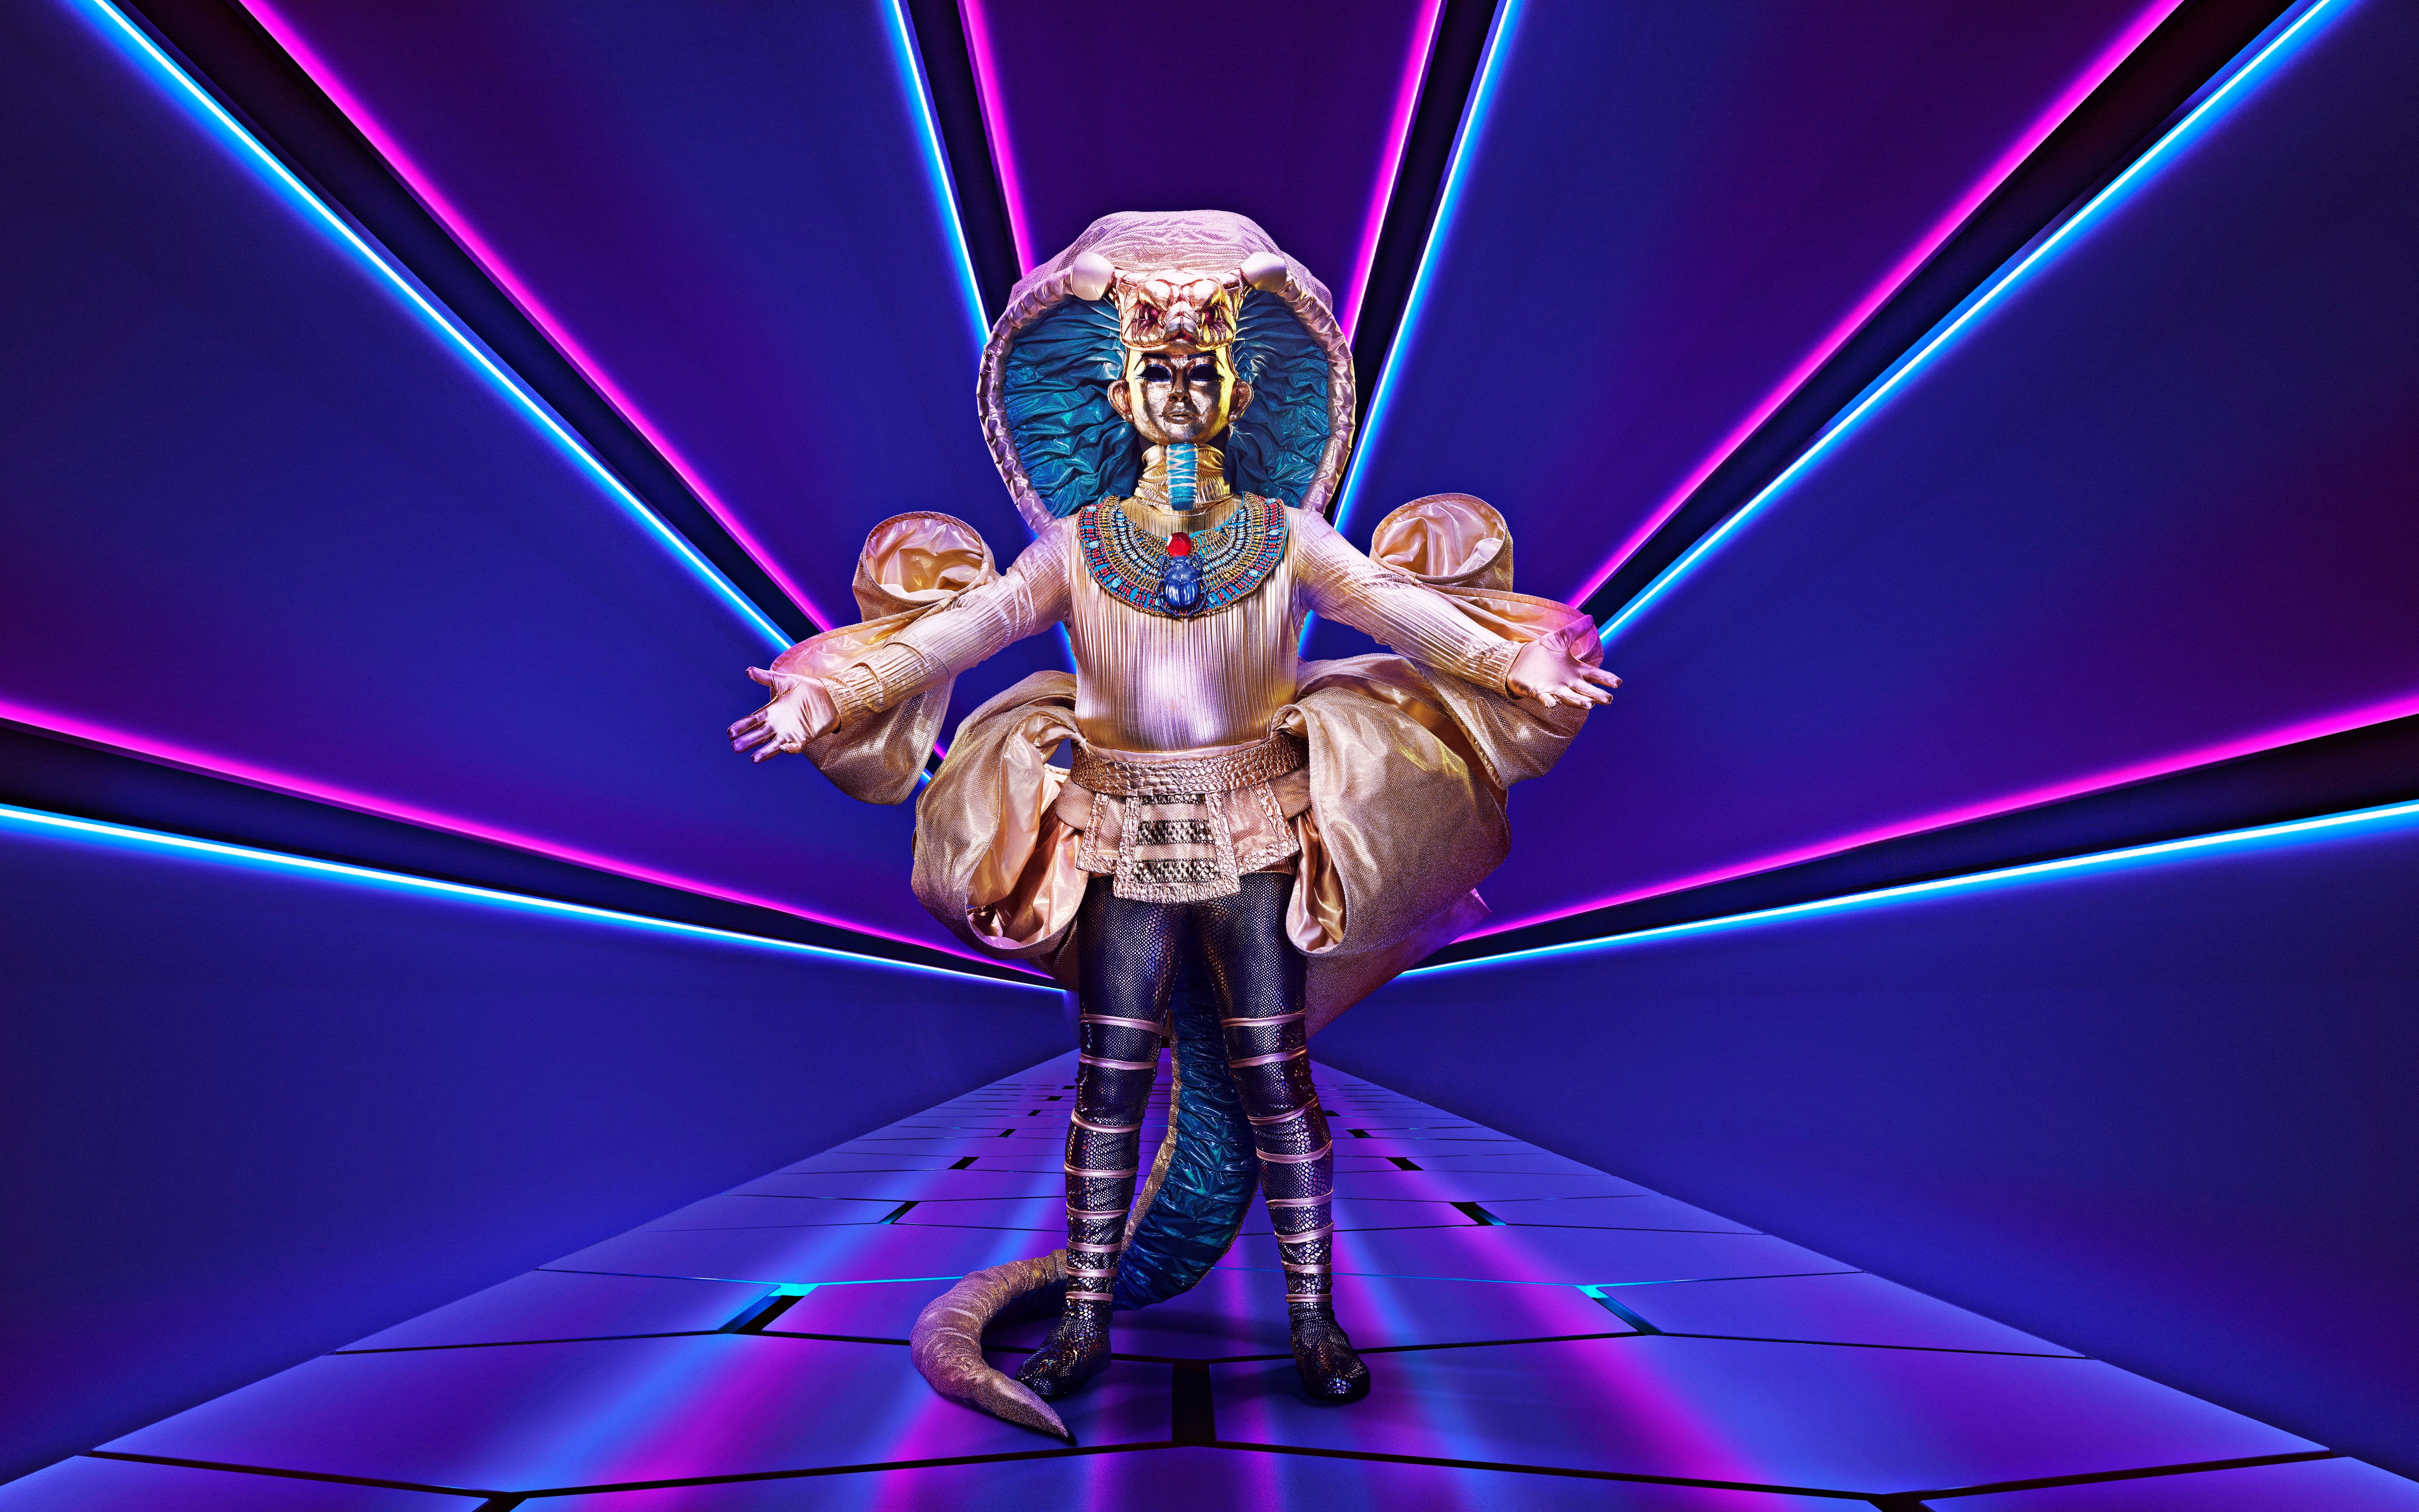 Photo by Vincent Dolman/ITV/Shutterstock (10506562f)
Pharaoh
'The Masked Singer' TV show, Series 1, UK - 04 Jan 2020
The Masked Singer, is a British ITV reality singing competition television series.